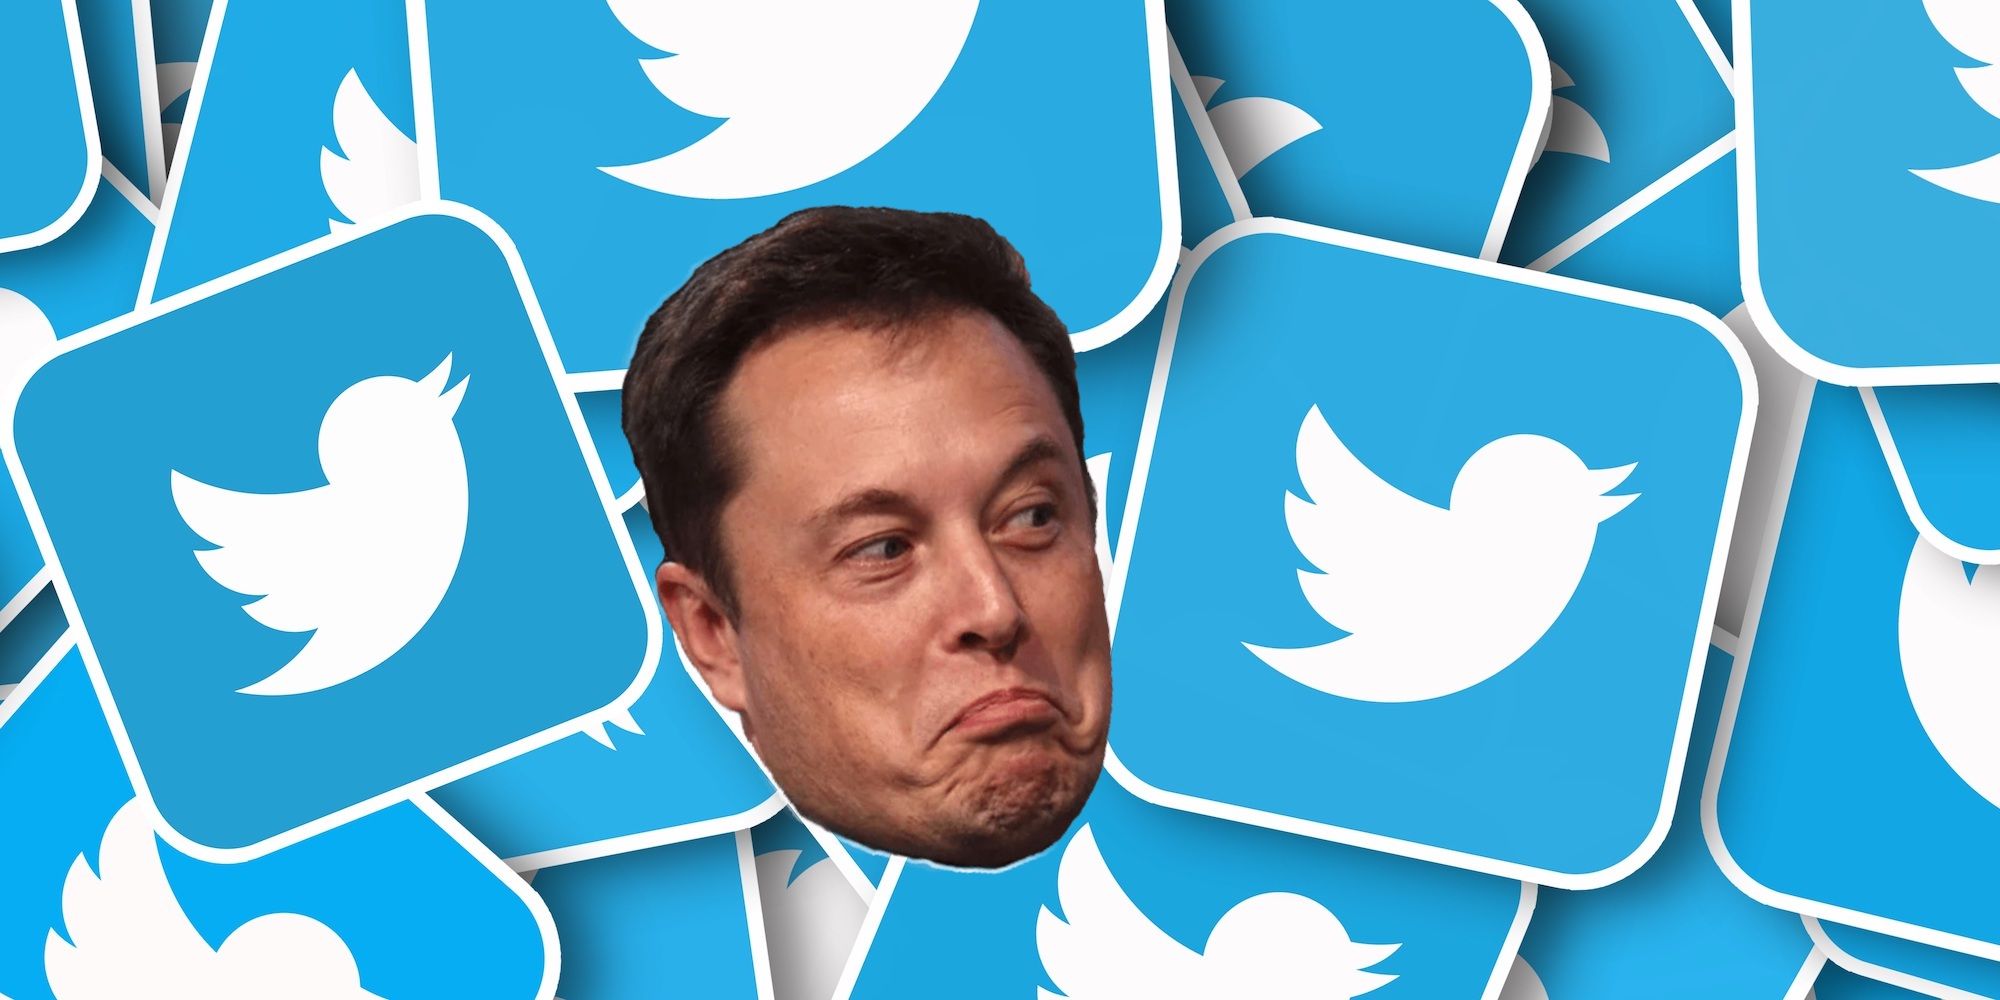 A cutout of Elon Musk's face on a background of Twitter icons